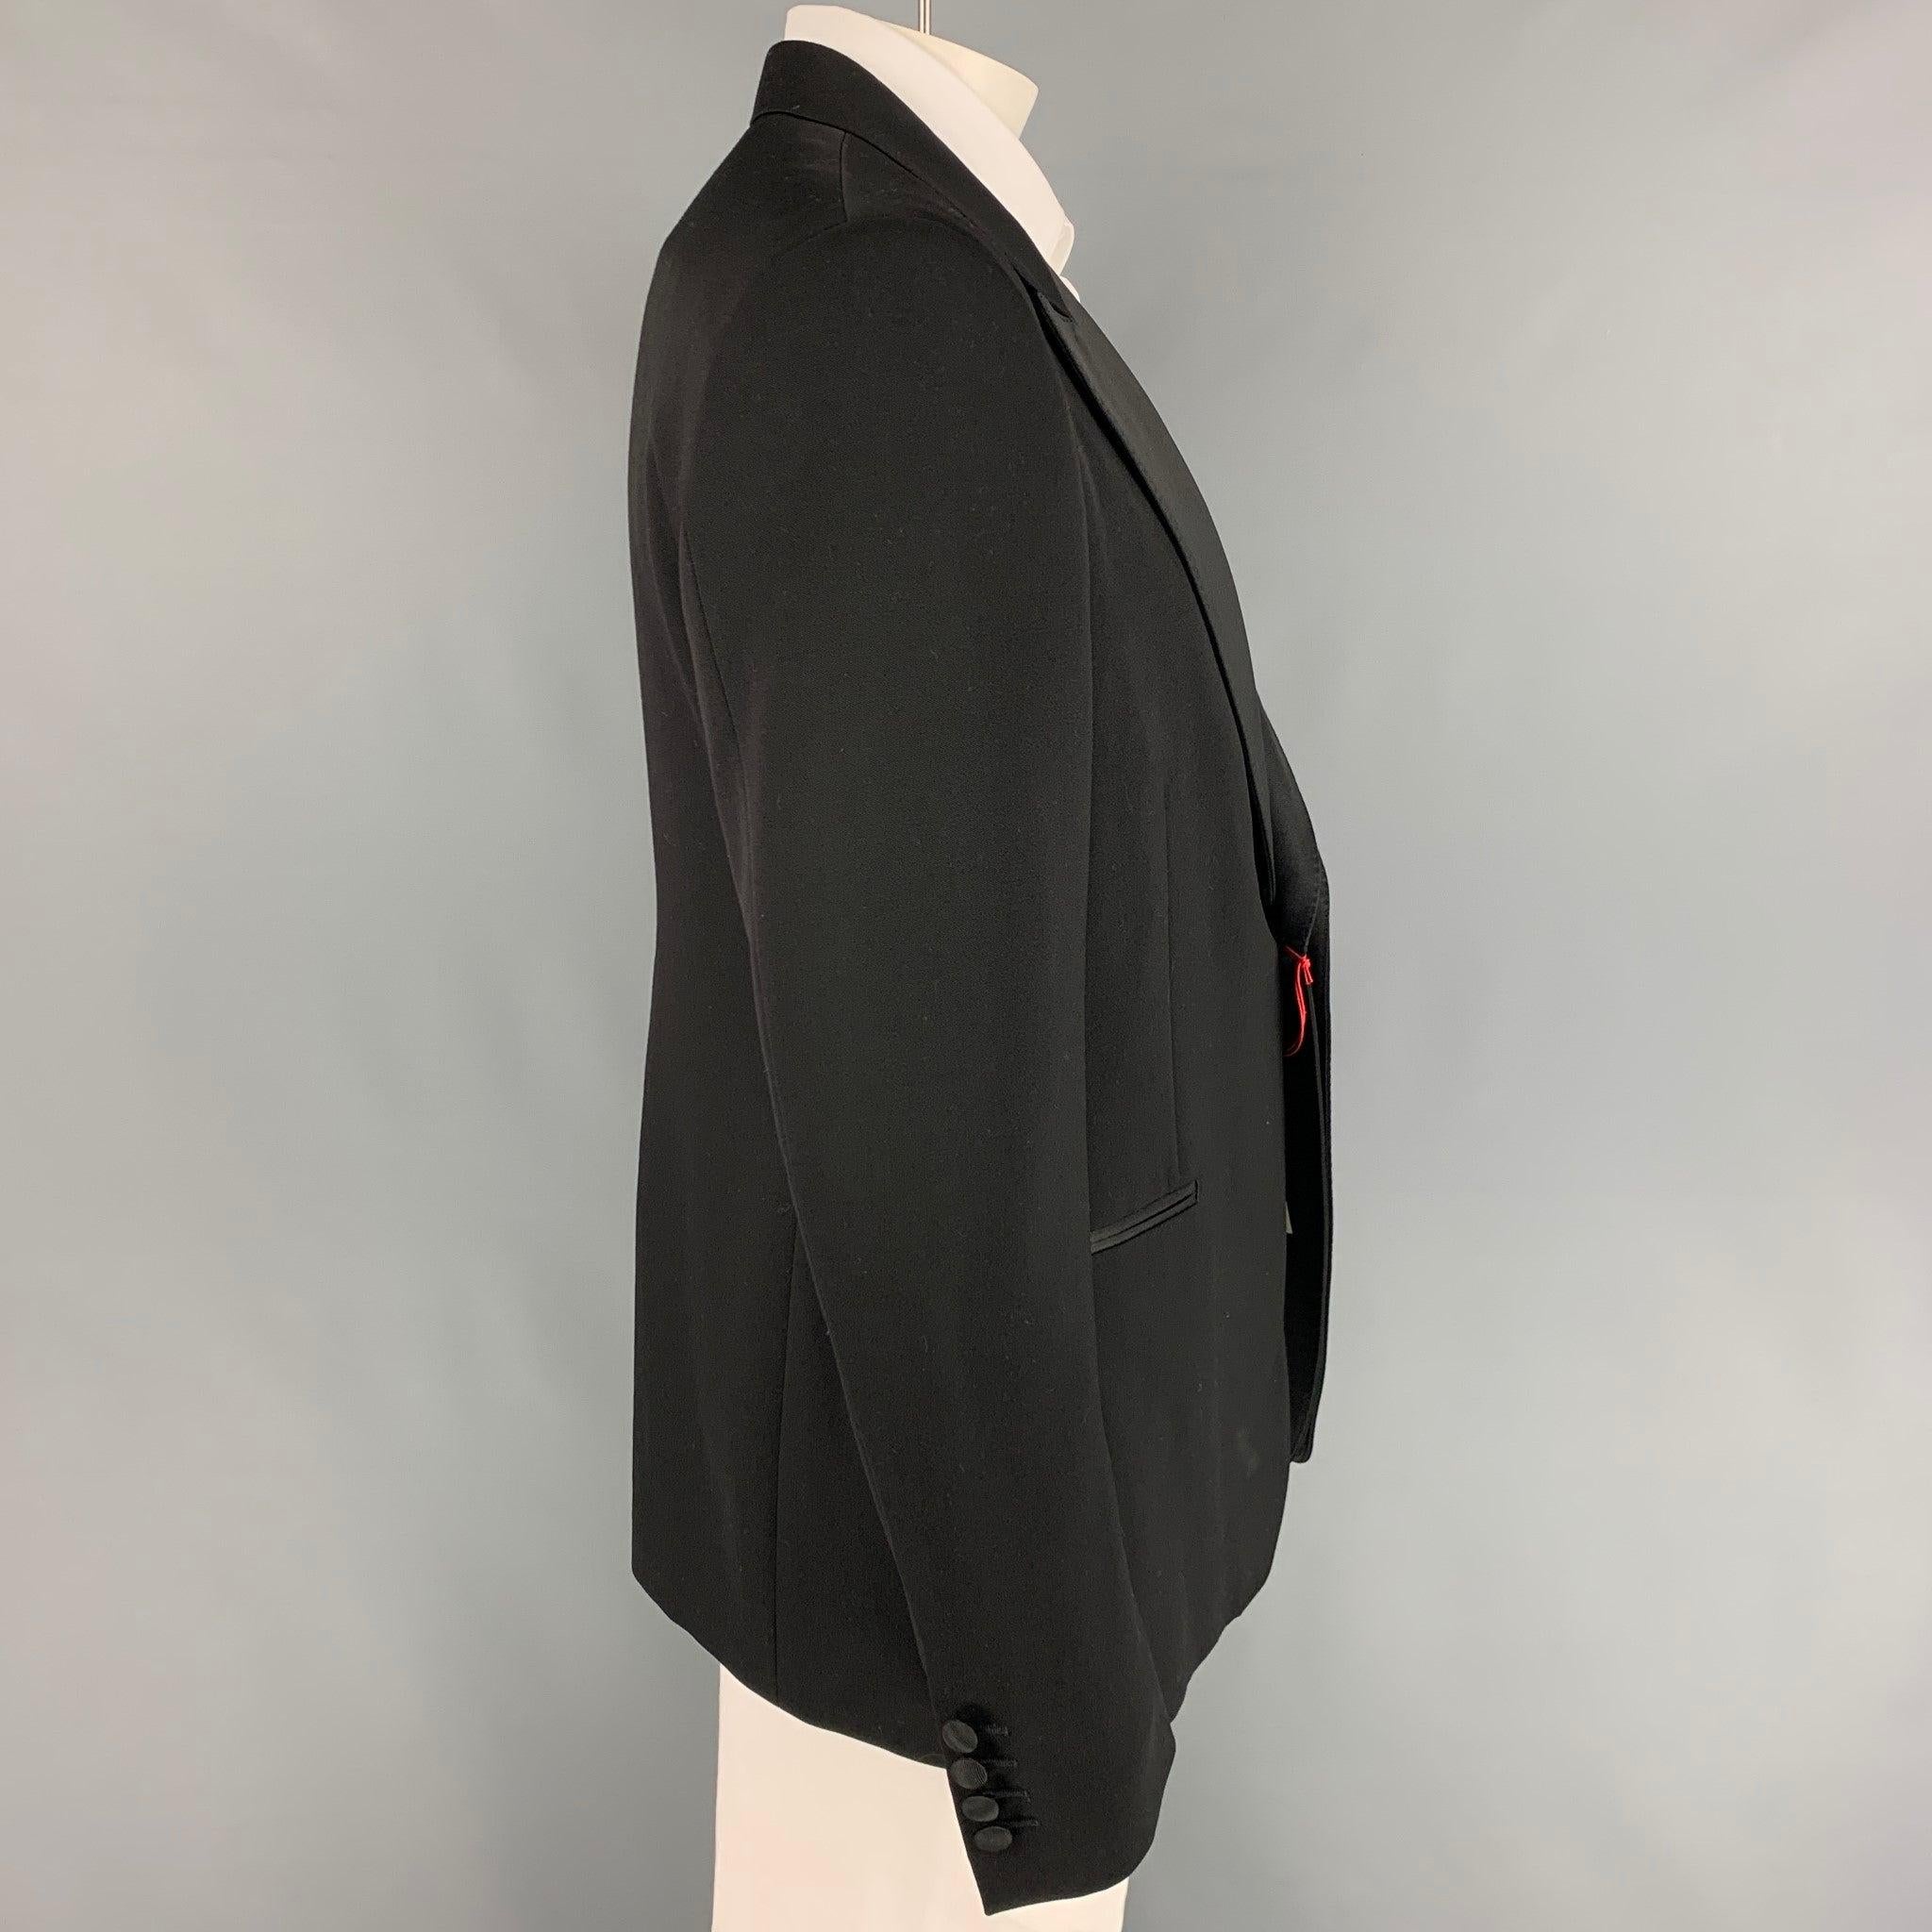 ALEXANDER McQUEEN sport coat comes in a black wool with a full liner featuring a double peak lapel, slit pockets, single back vent, and a single button closure. Made in Italy.
New With Tags. 

Marked:   56  

Measurements: 
 
Shoulder: 19 inches 